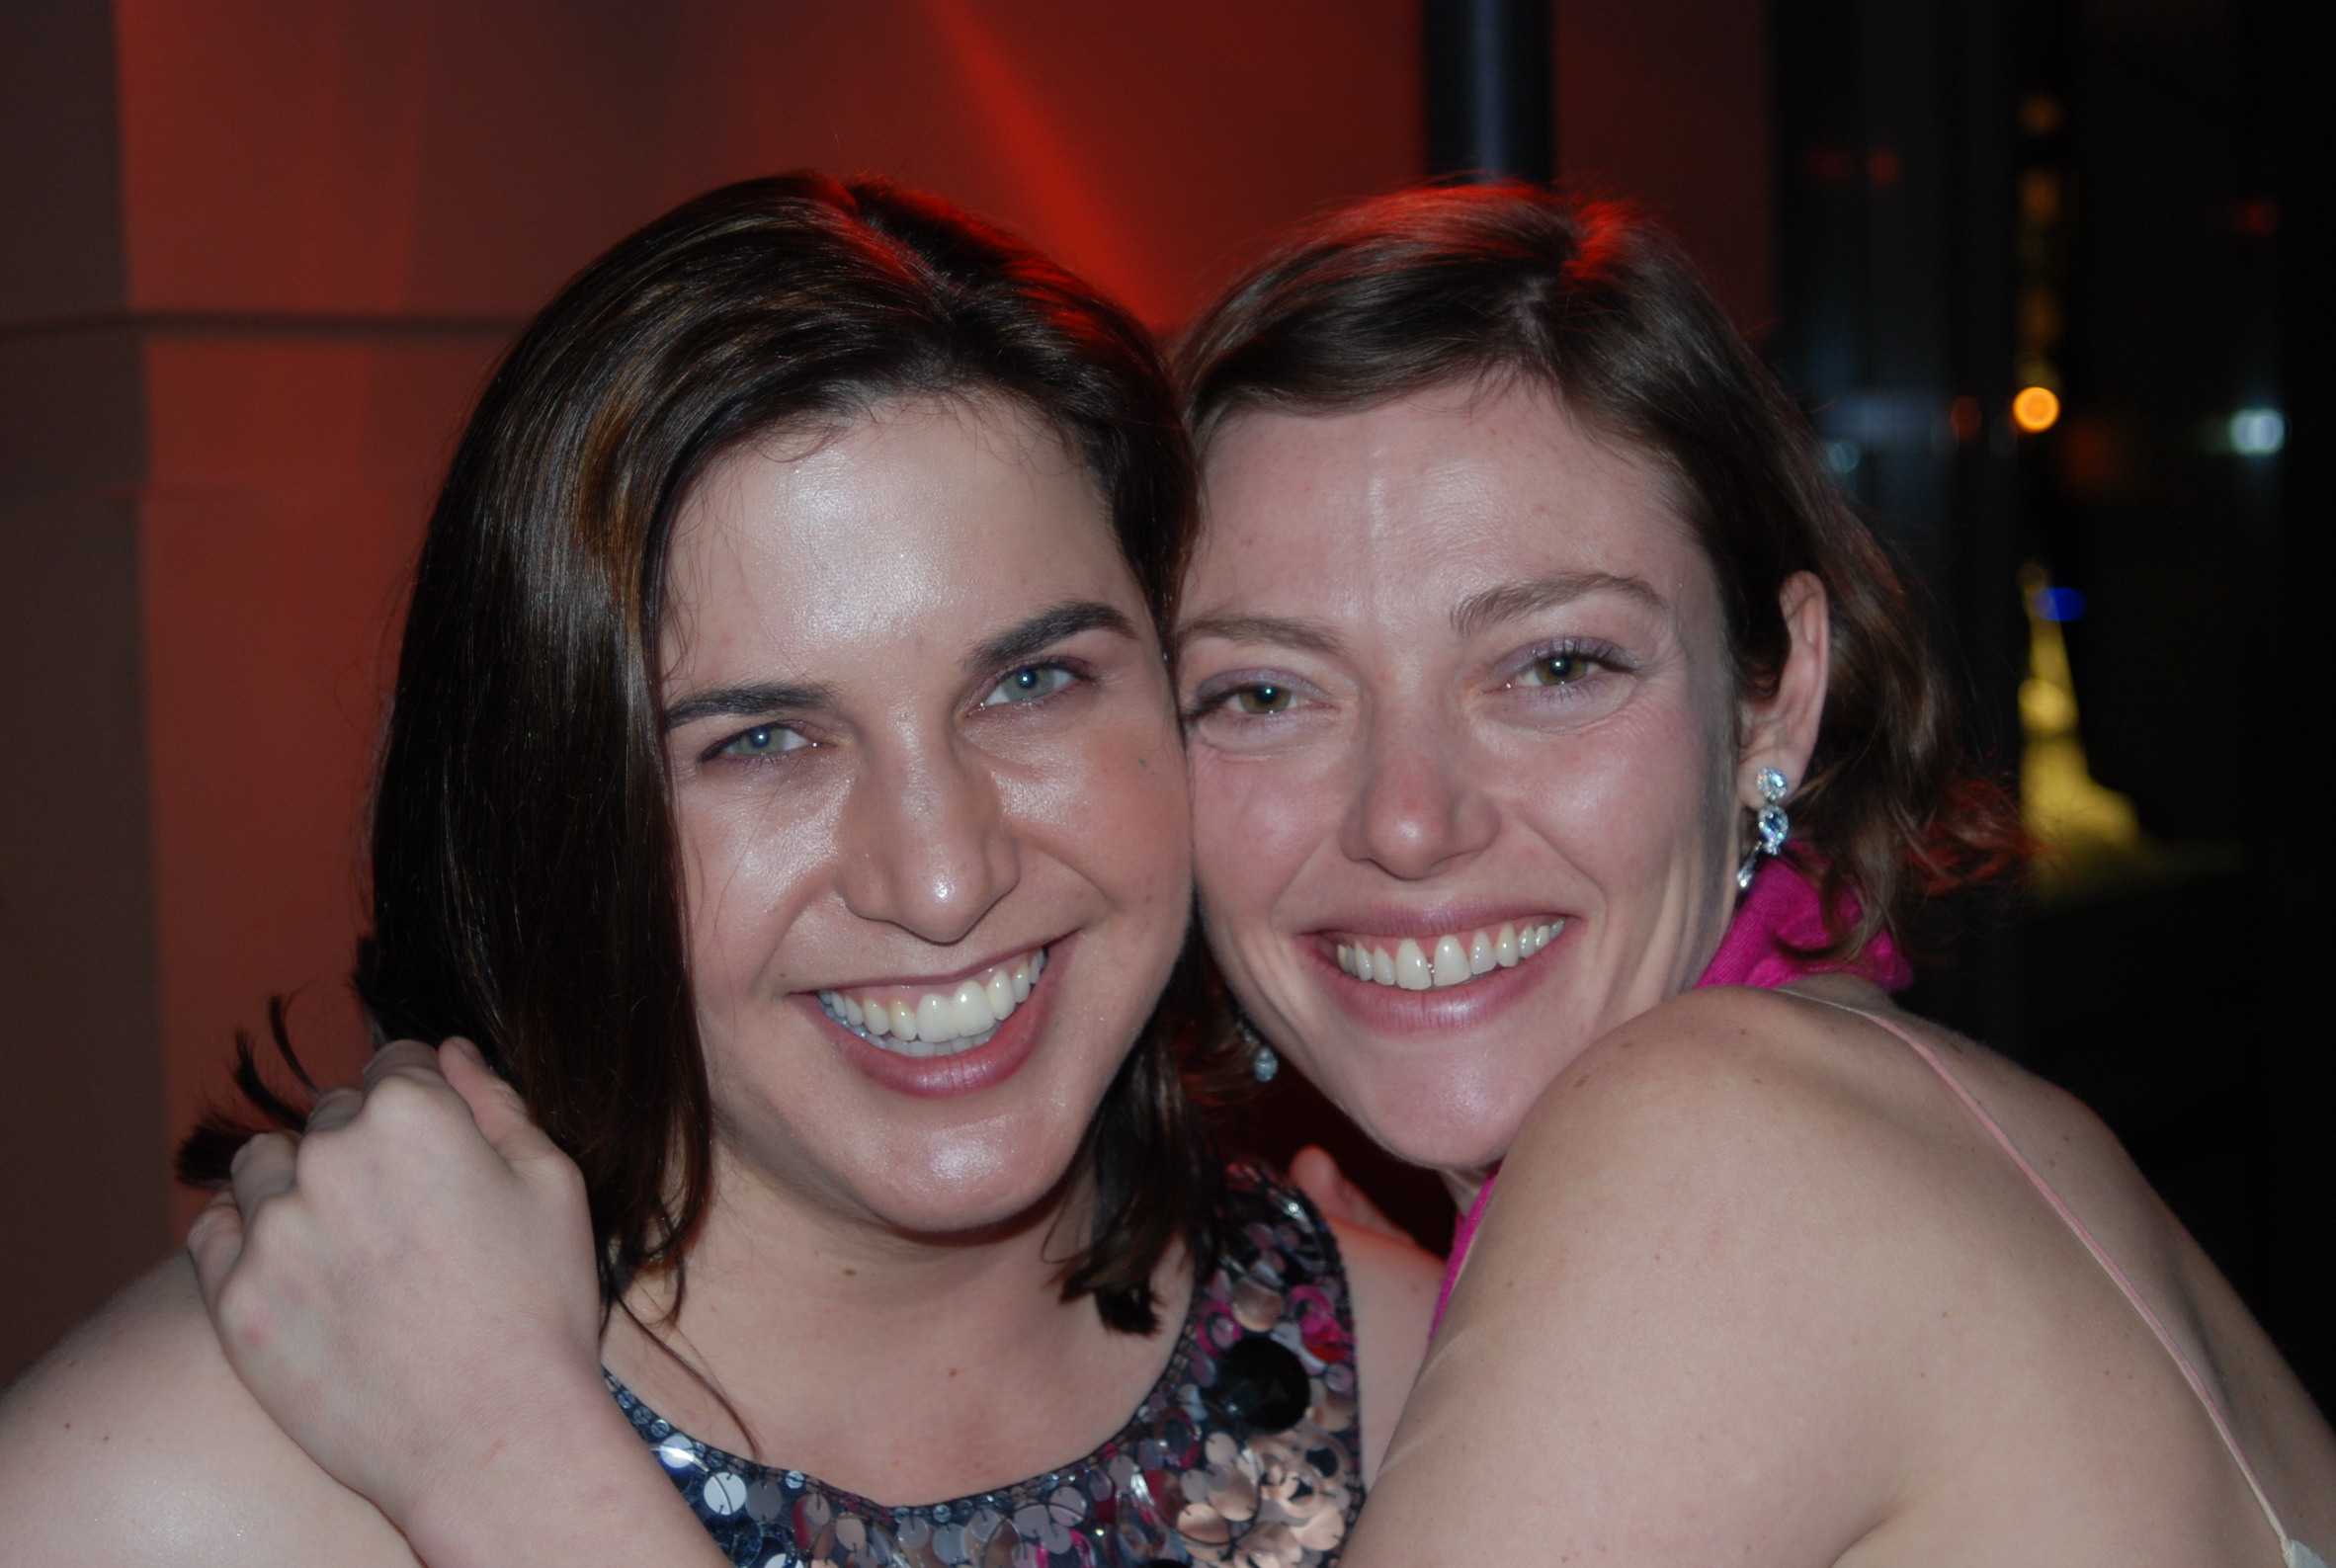 Screenwriter Caitlin McCarthy and actress/model Camilla Rutherford at the 6th Annual Monaco International Film Festival.